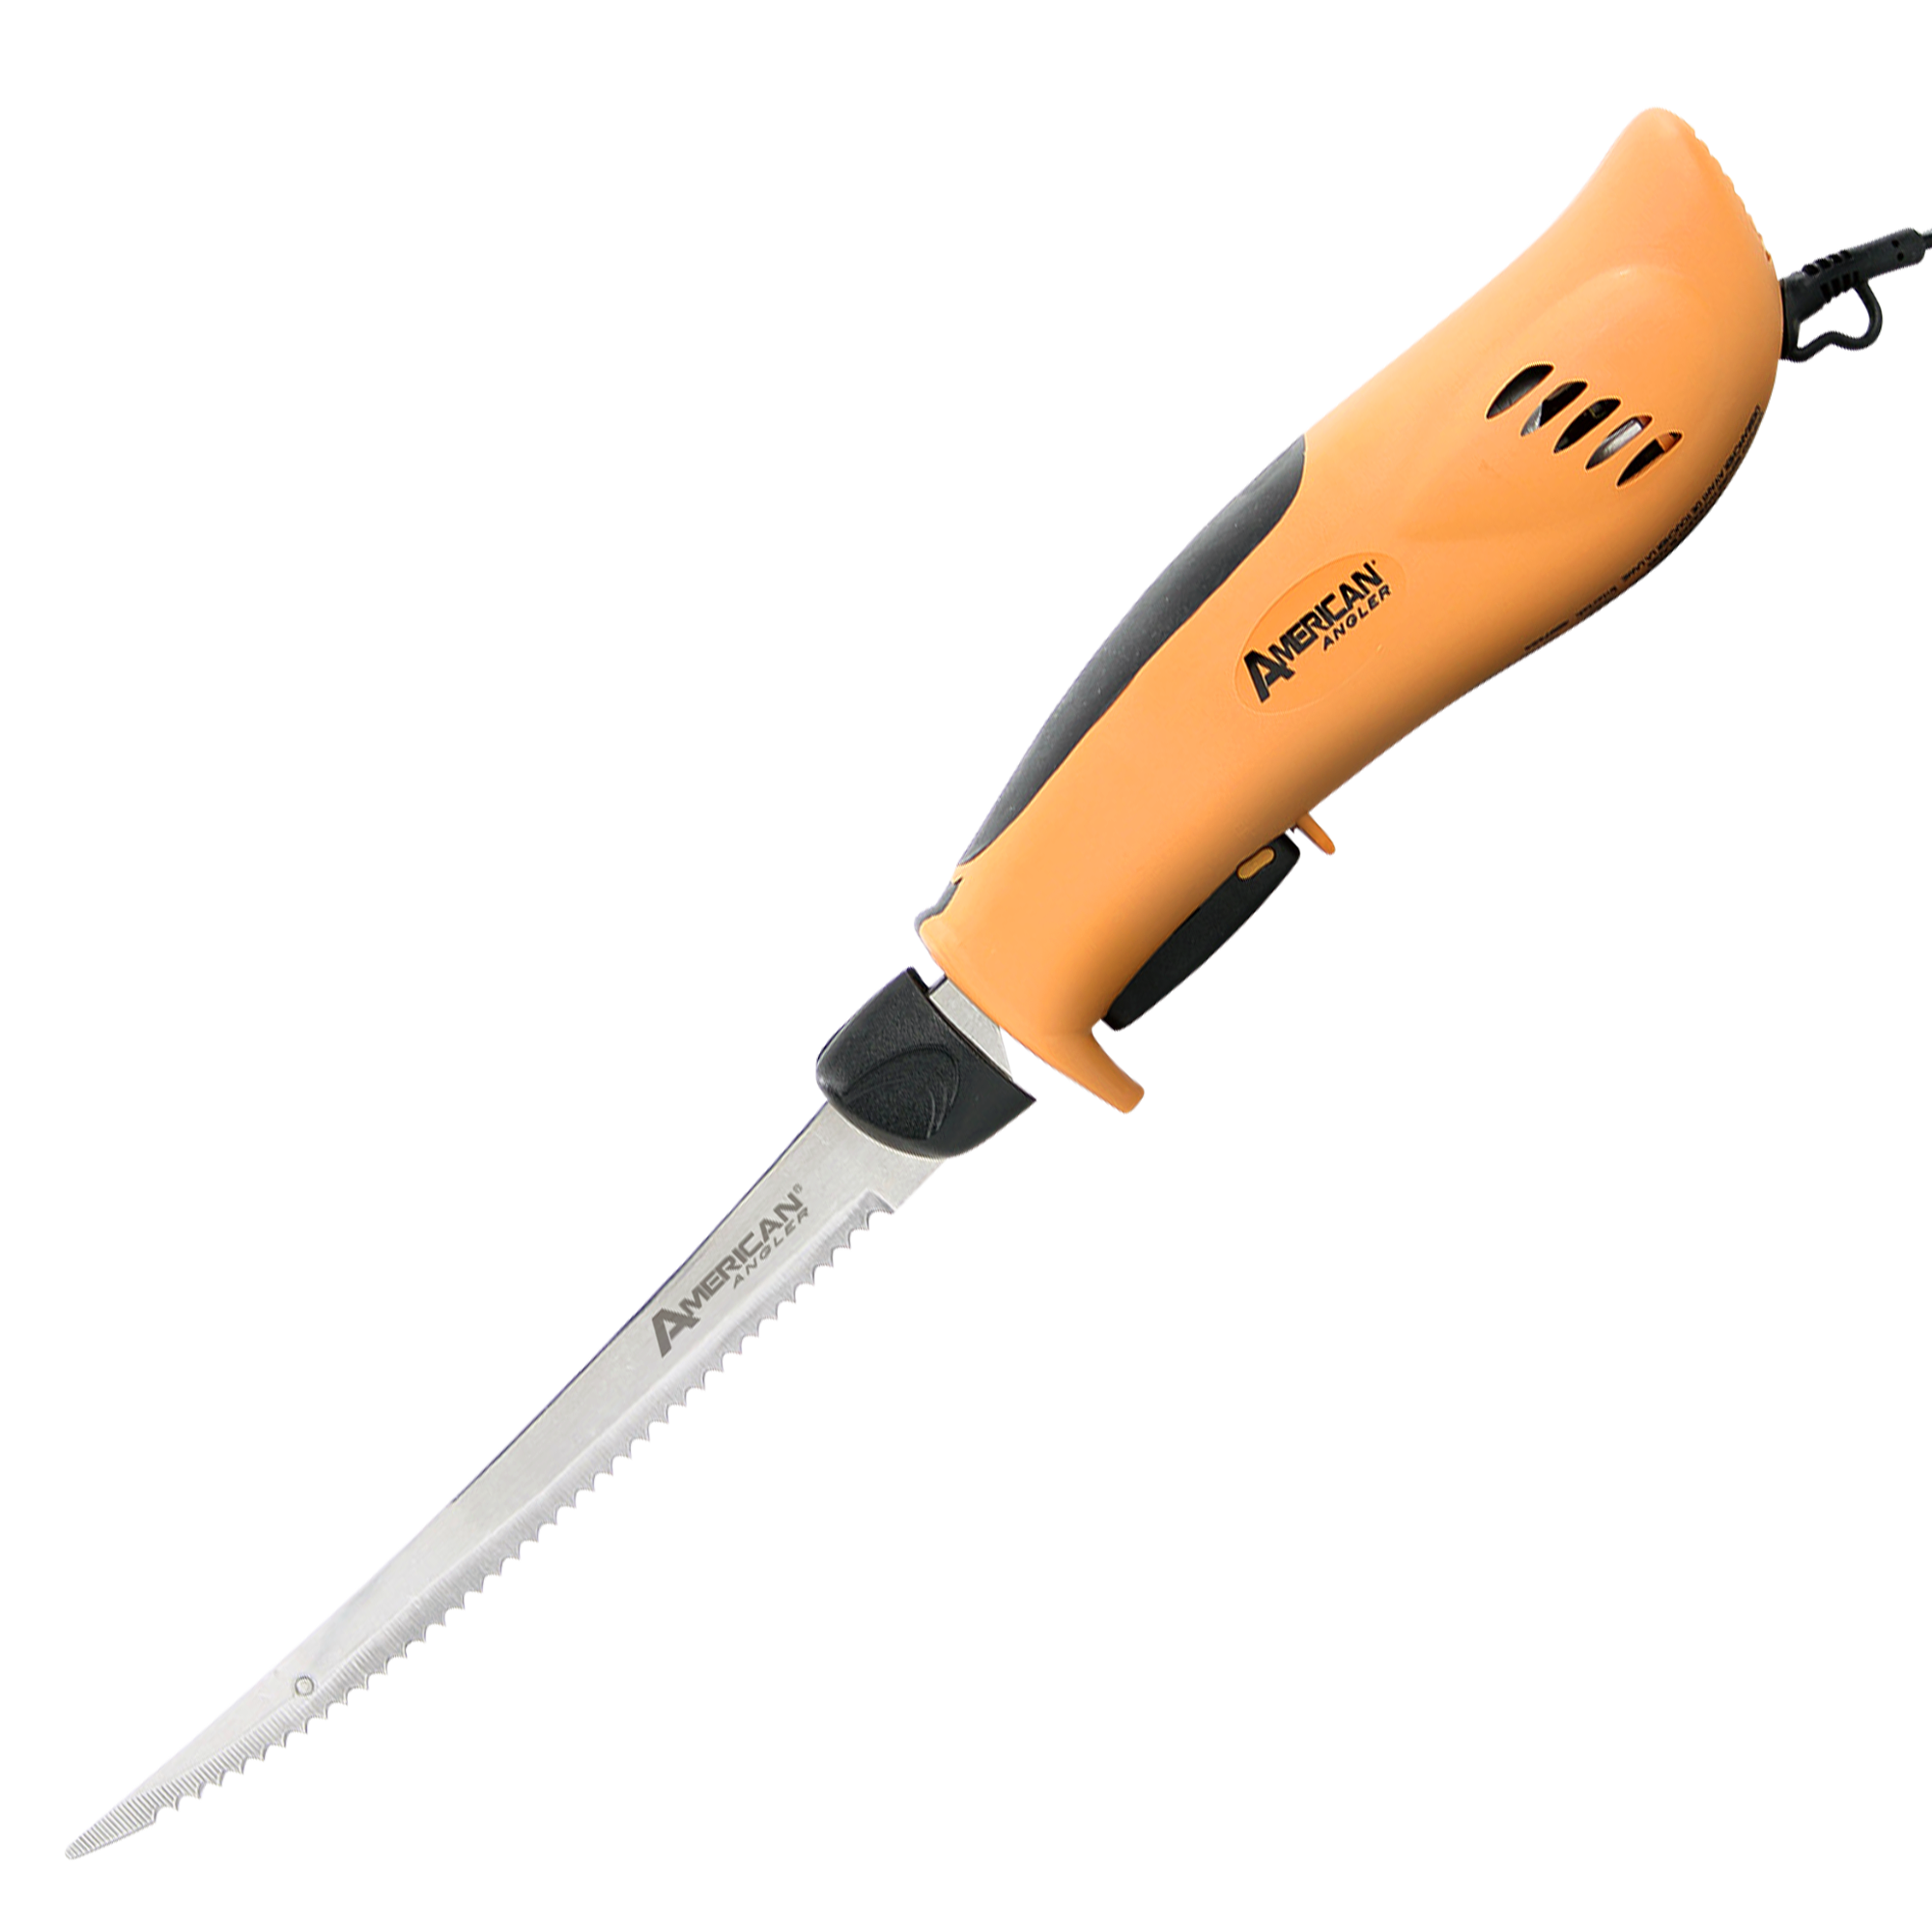 PRO Stainless Steel Electric Fillet Knife With 8” Freshwater Blade